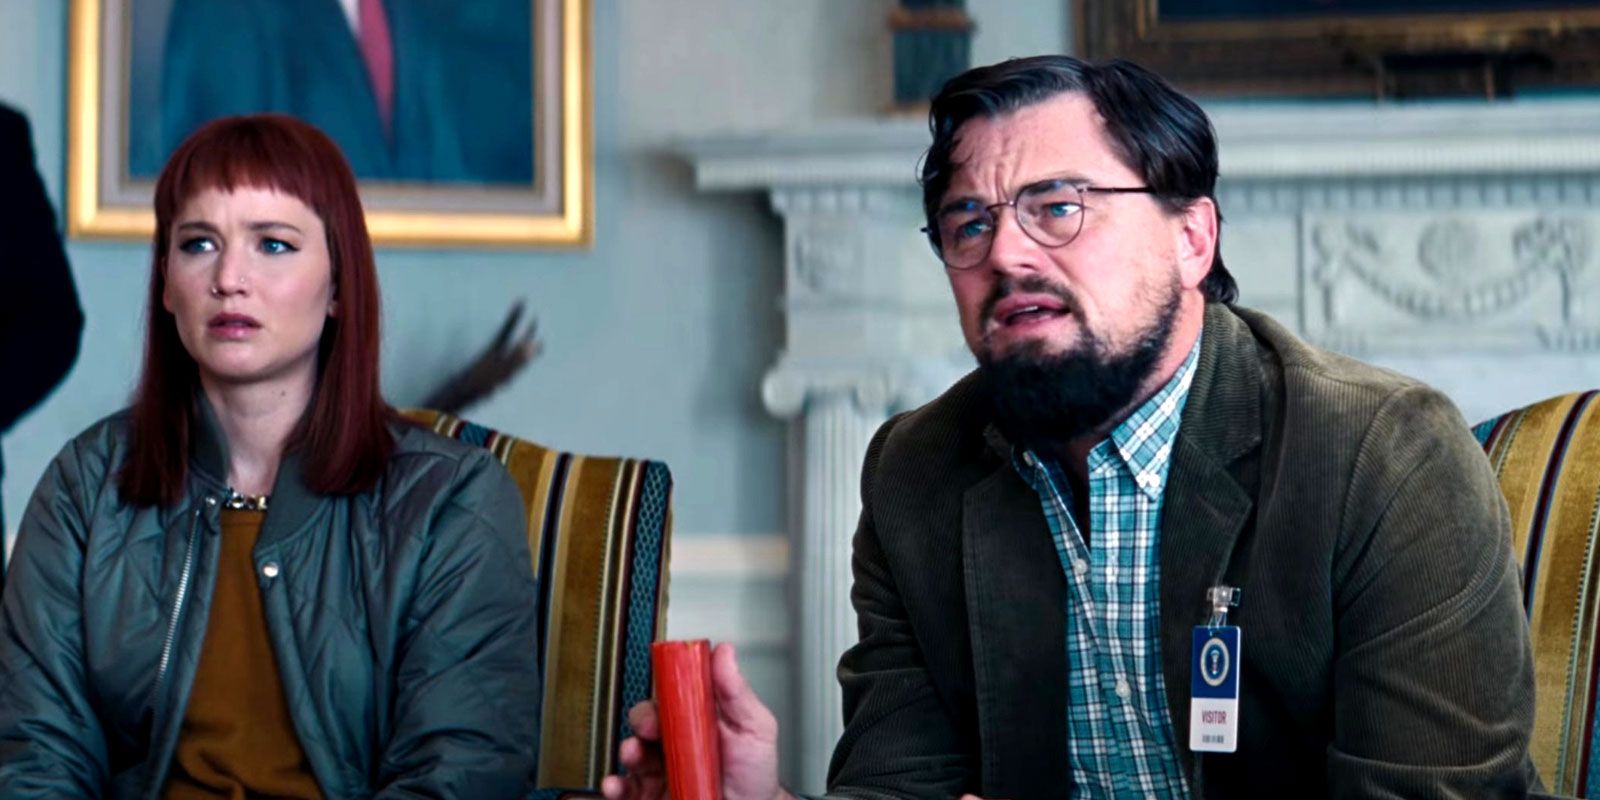 Leonardo DiCaprio and Jennifer Lawrence as Randall Mindy and Kate Dibiasky in the Oval Office during Don't Look Up